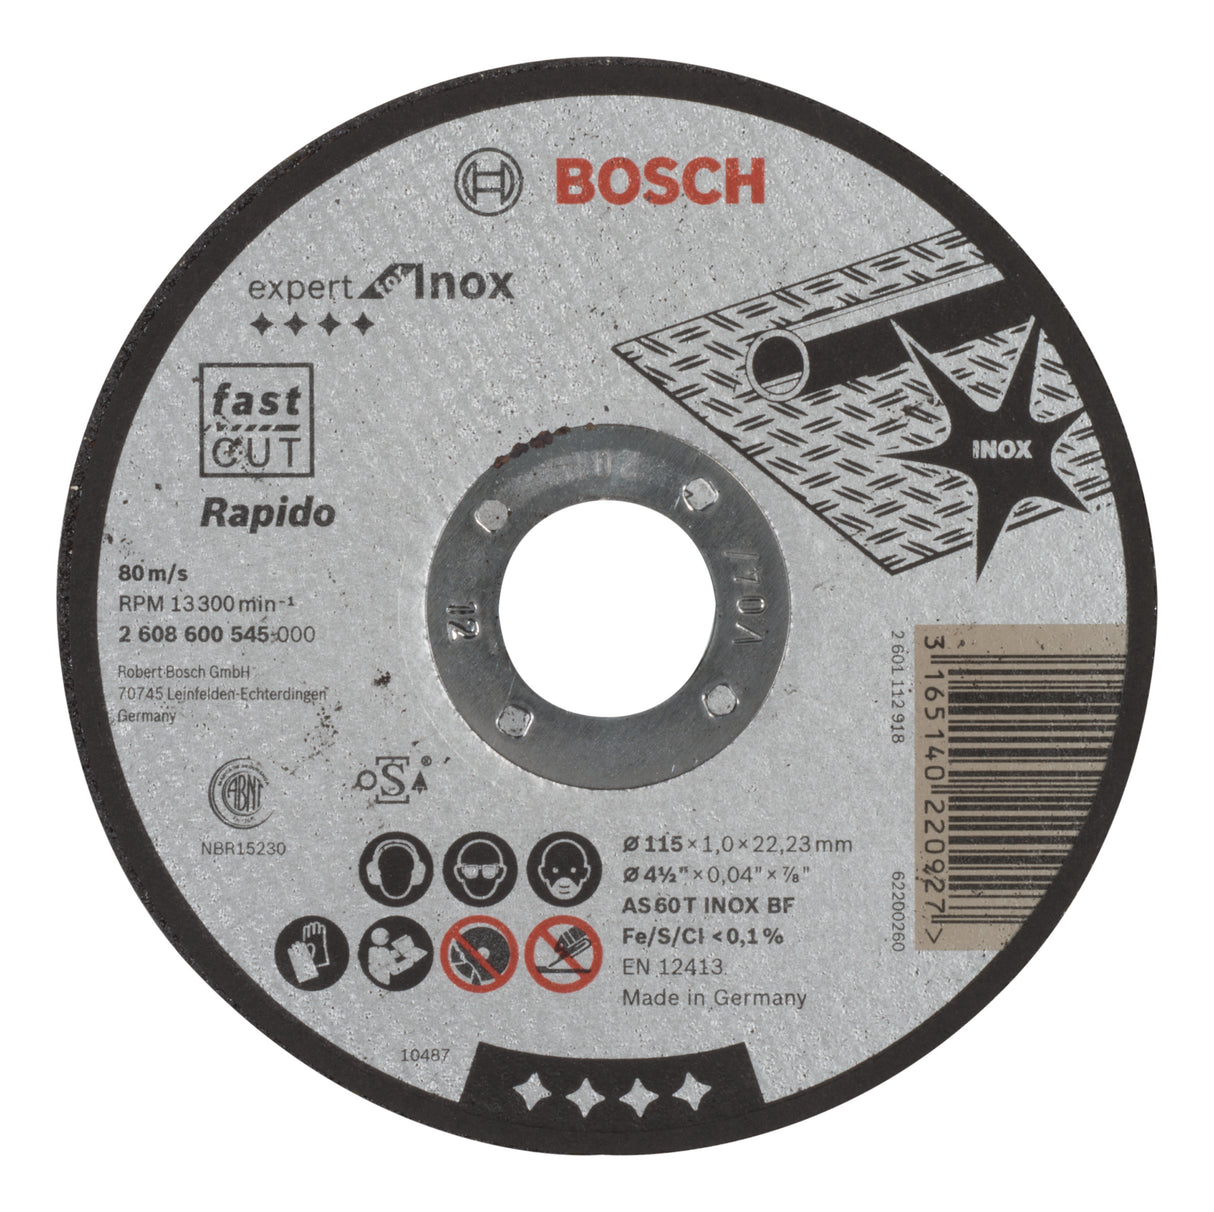 Bosch Professional Expert for Inox - Rapido Straight Cutting Disc AS 60 T INOX BF, 115mm x 1.0mm